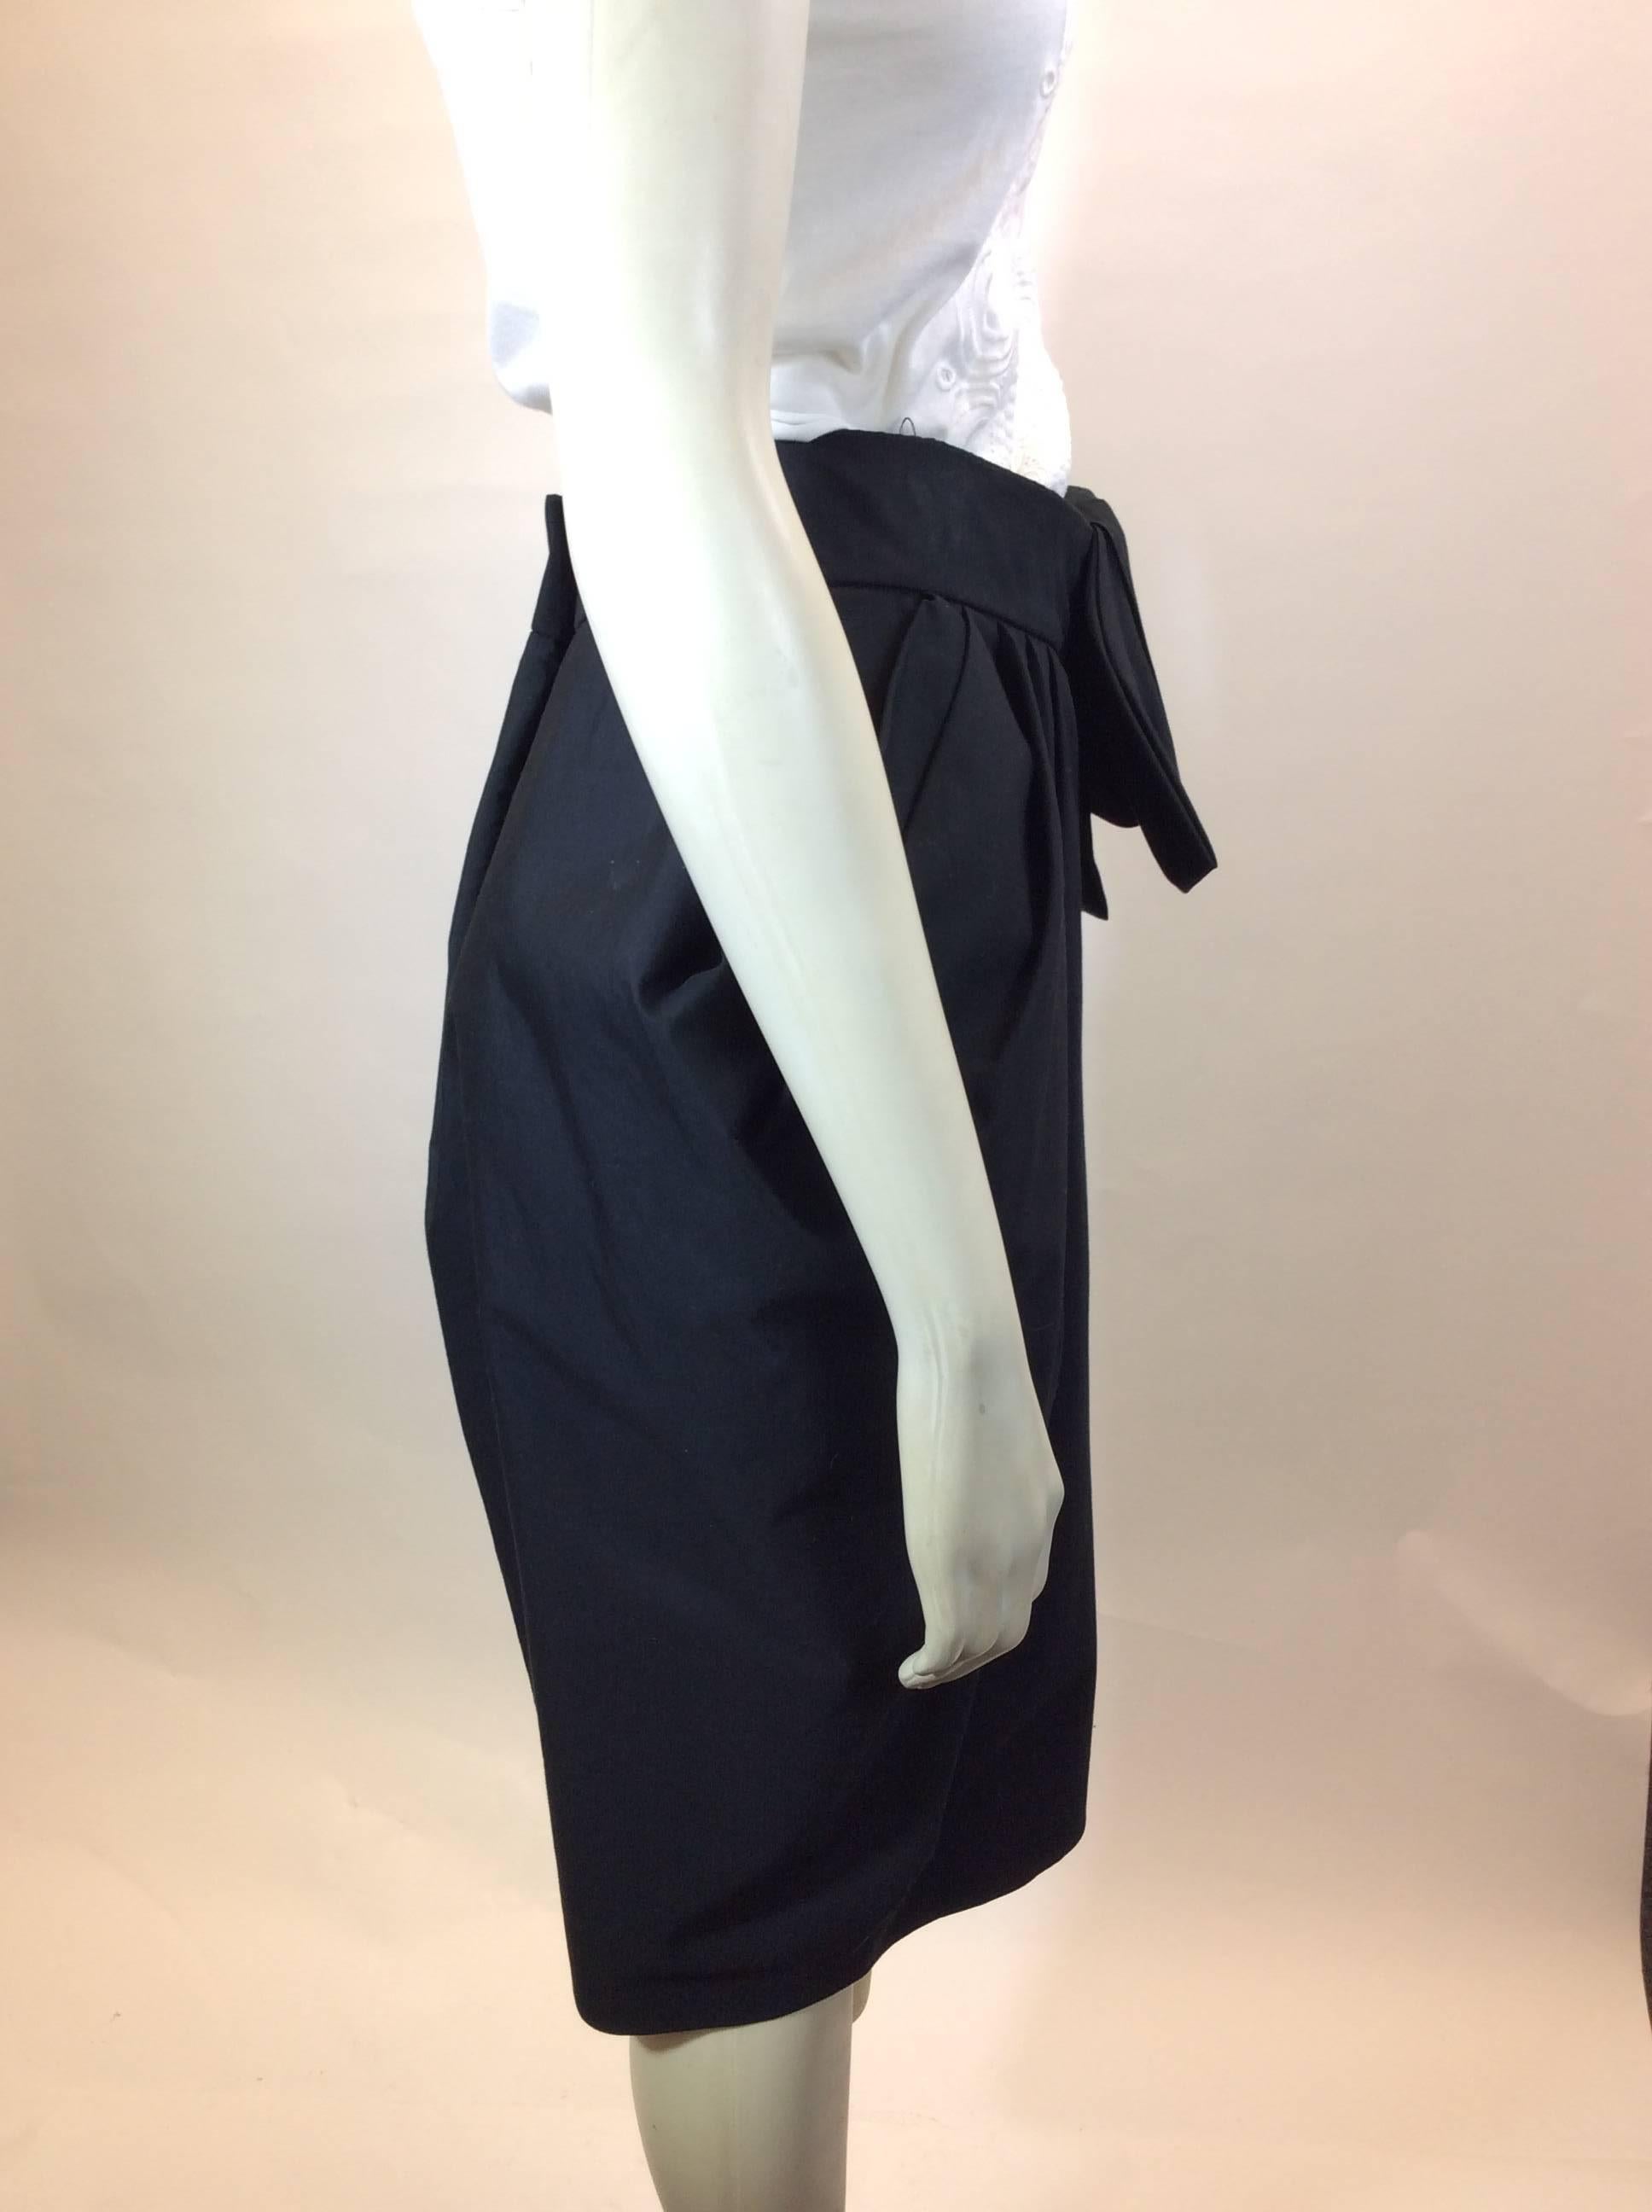 Donna Karan Size 8
Black gathered skirt with bow in front
100% cotton
Vintage